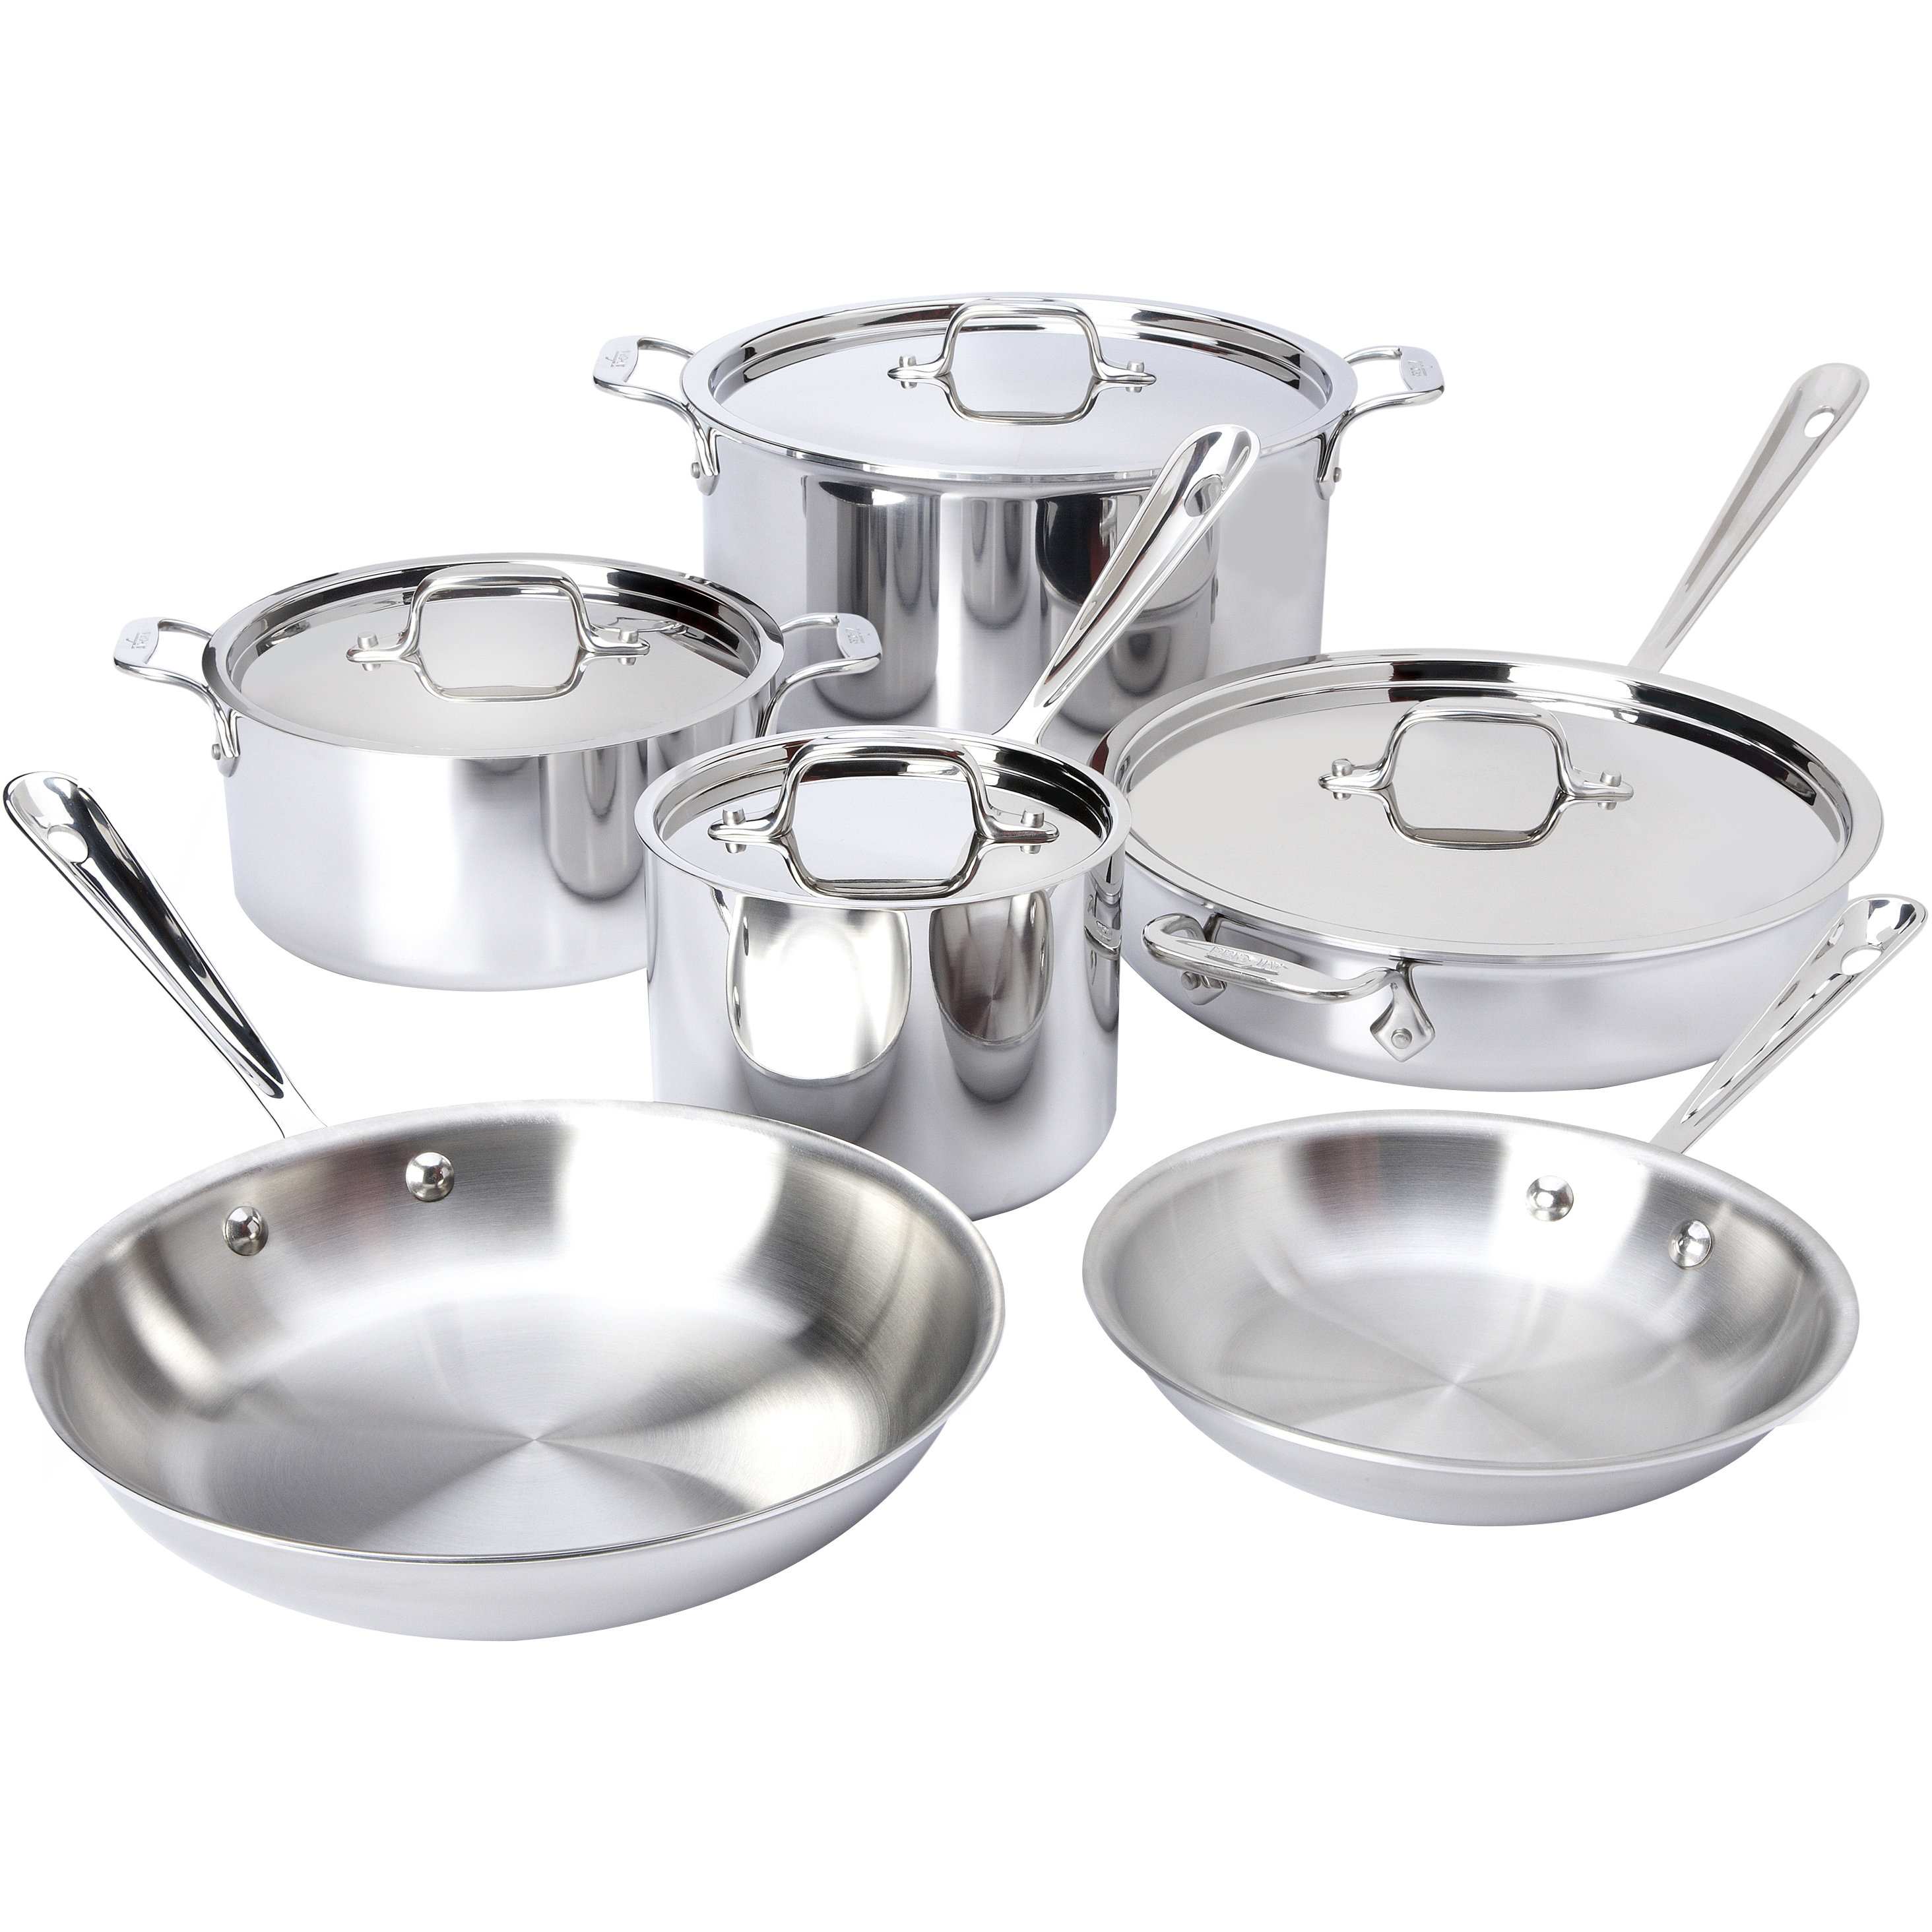 All-Clad Stainless Steel 10 Piece Cookware Set & Reviews | Wayfair Stainless Steel Wok All Clad